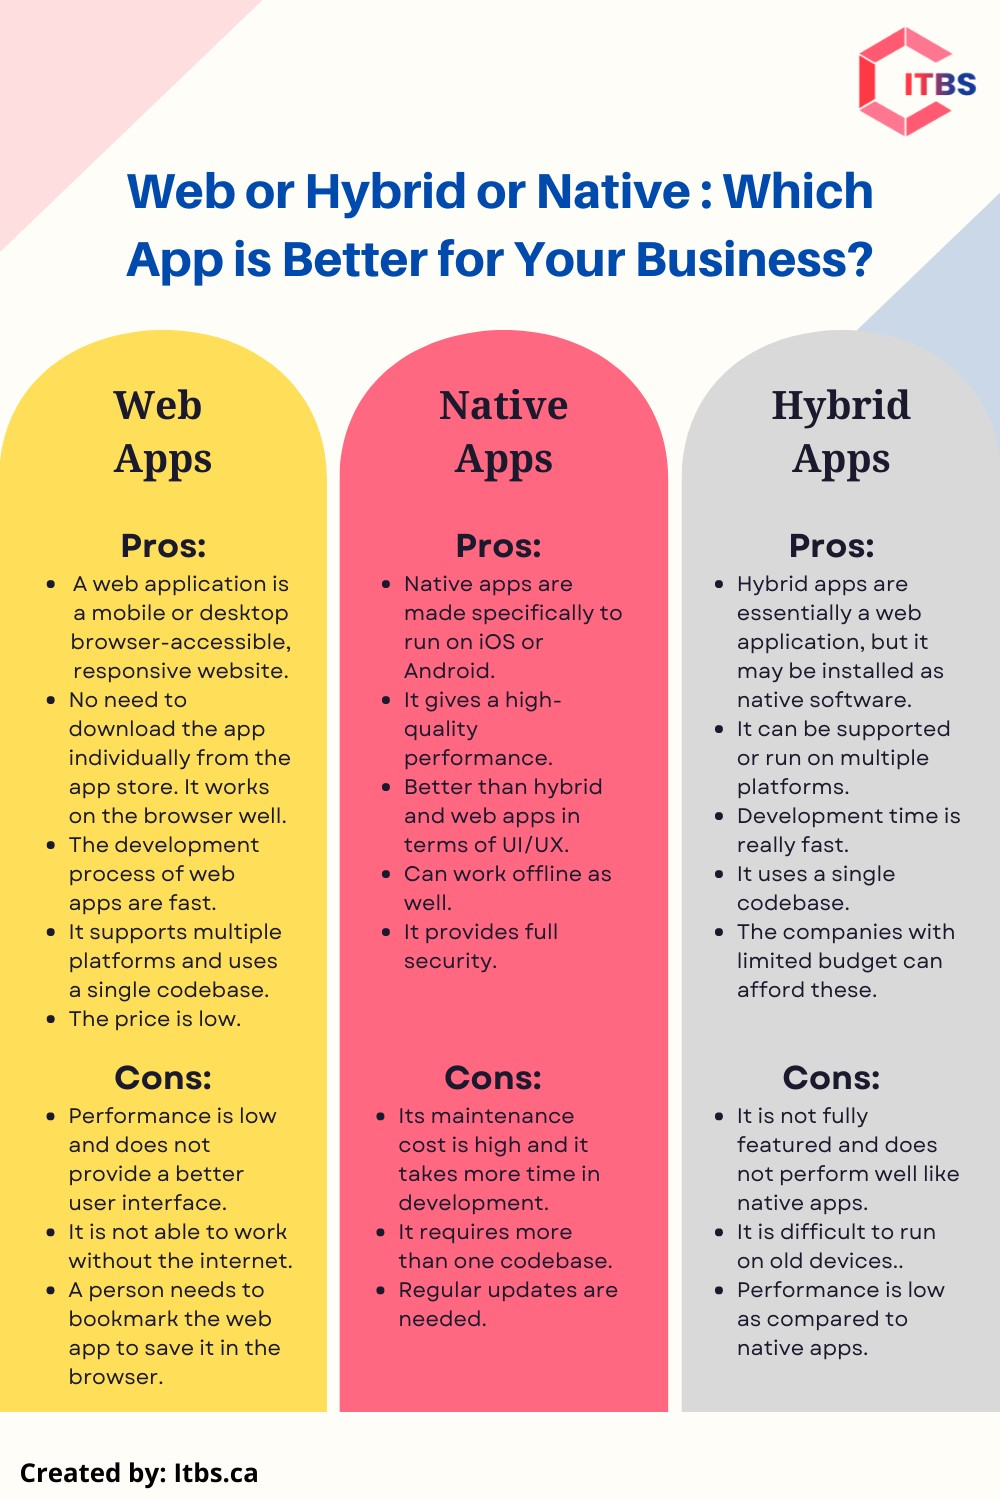 Web, Native or Hybrid Apps: Which Suits Best to Your Business